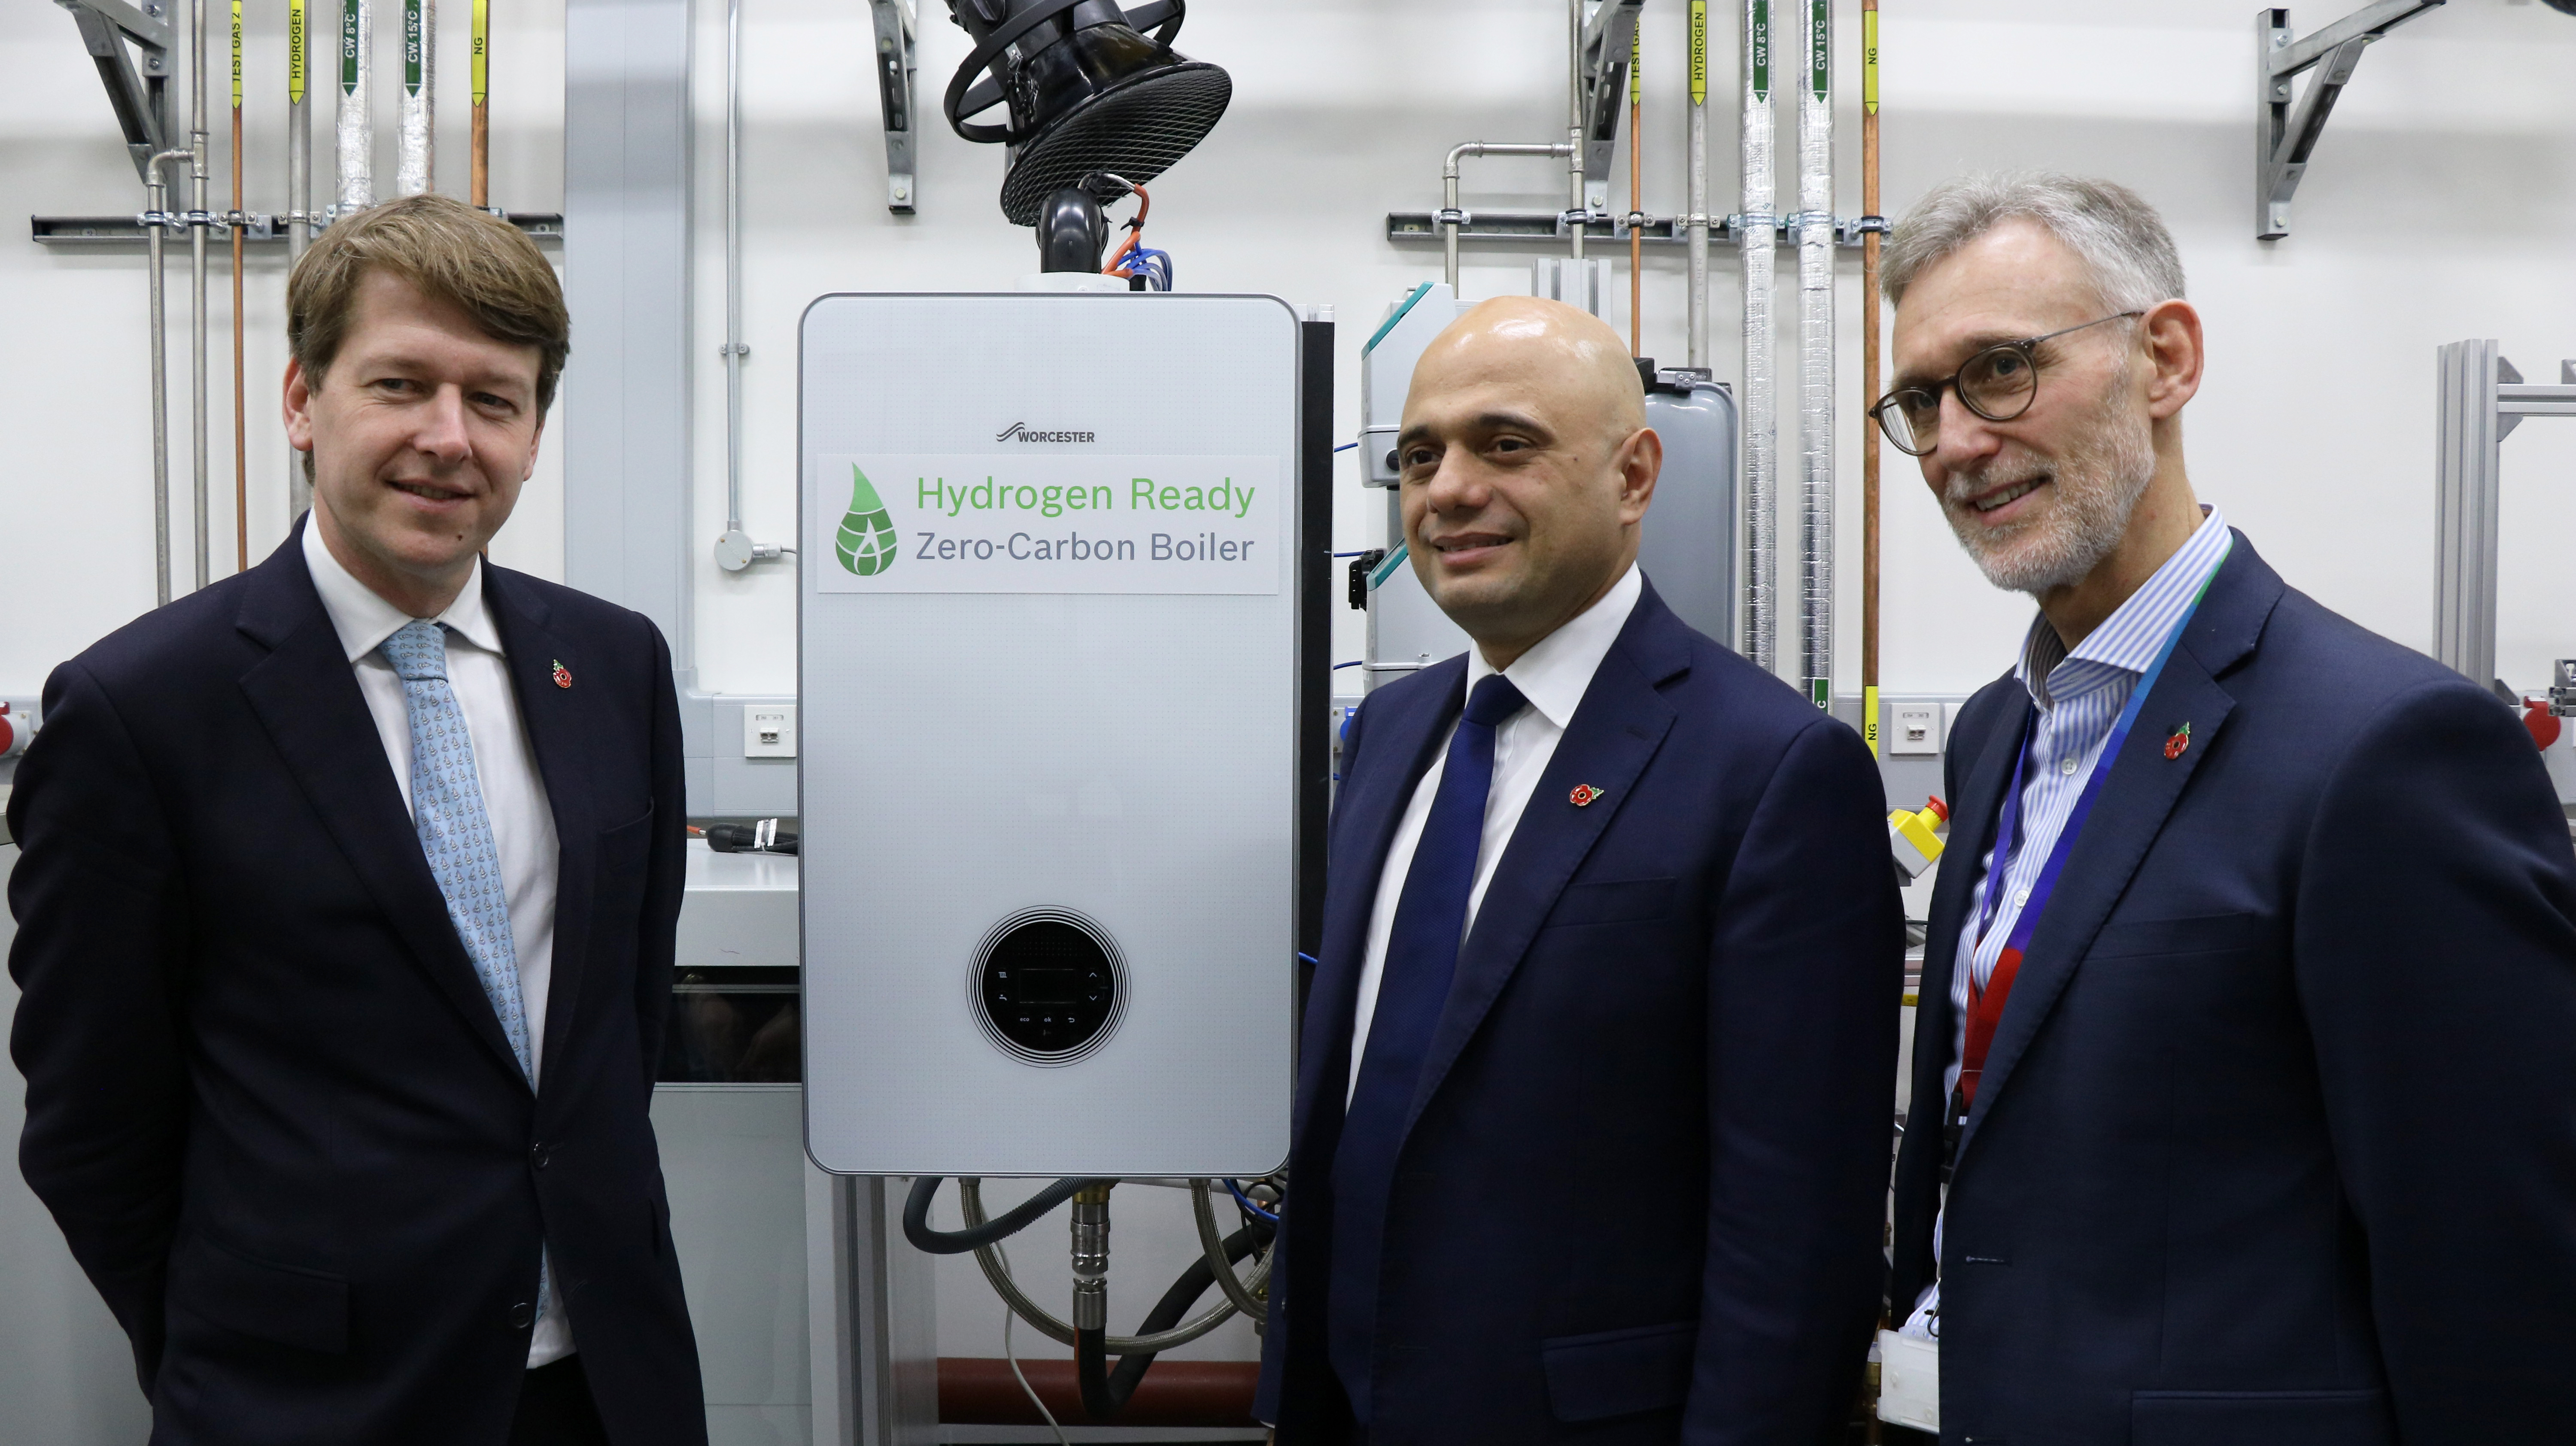 Chancellor visits Worcester Bosch to see the future of heating with new ‘clean gas’ laboratory #netzero @BoschGlobal @BoschPress